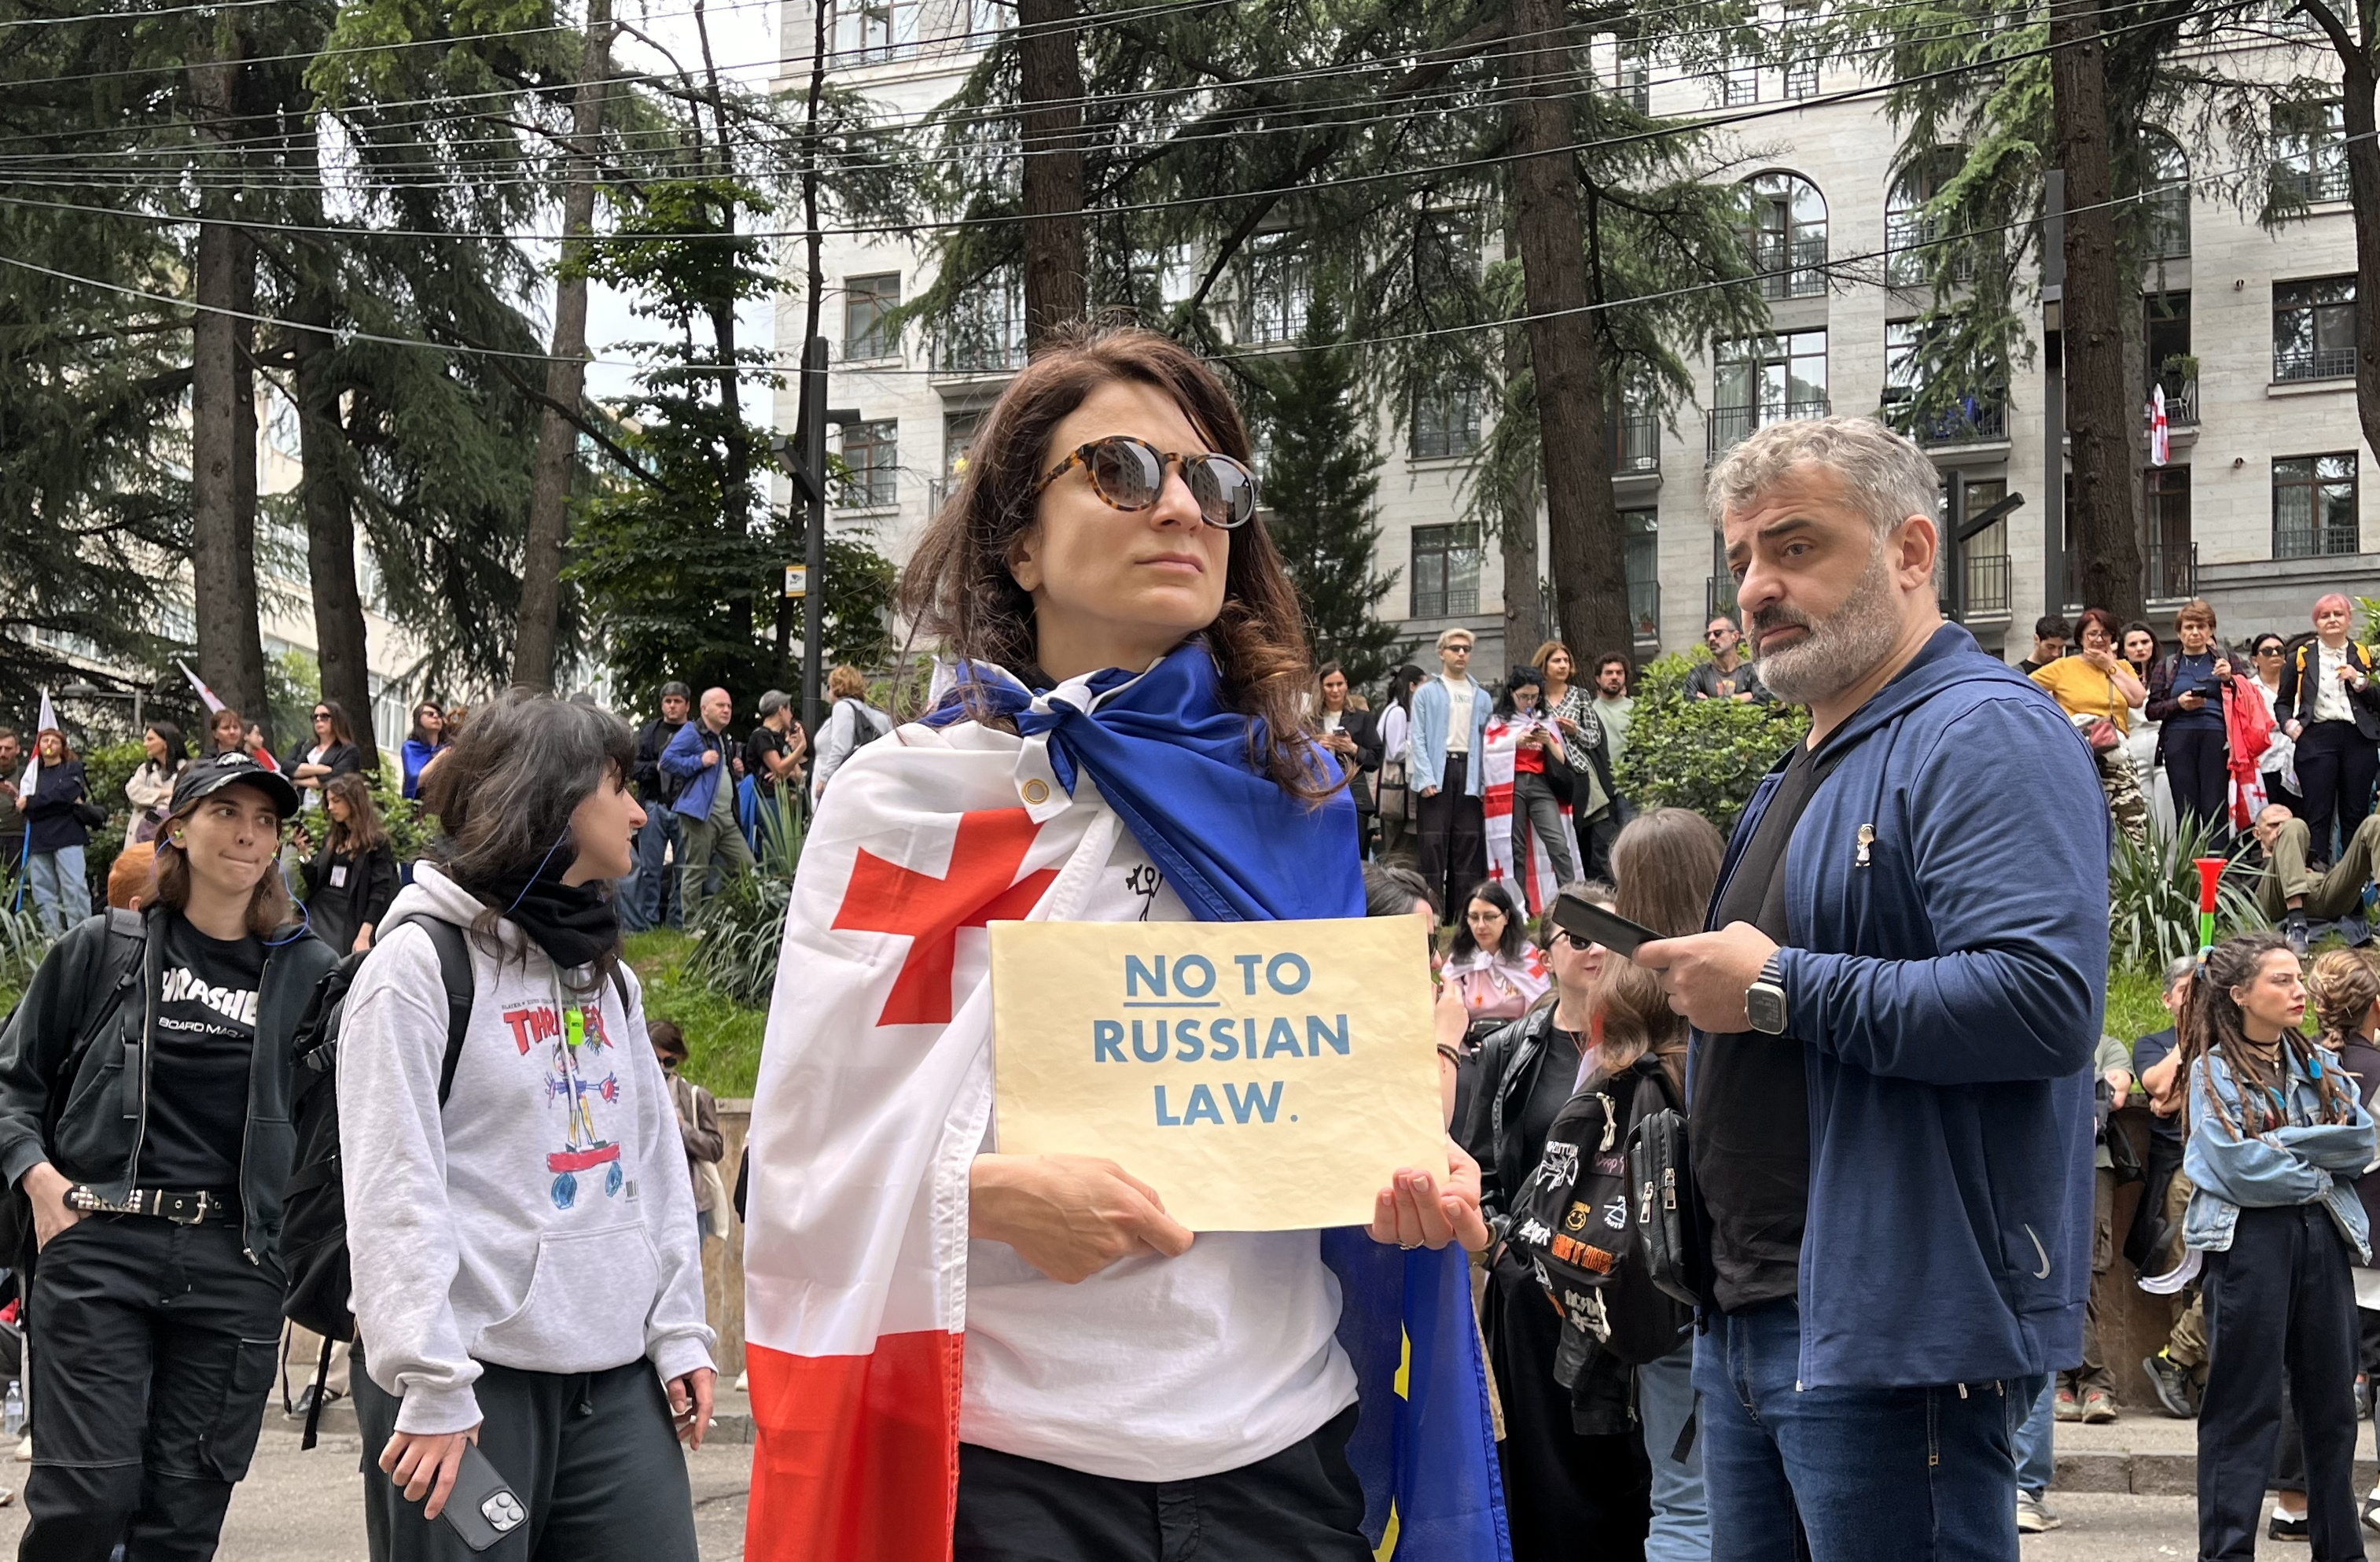 A woman in the middle of a demonstration has tied a Georgian flag over her shoulders and is holding a sign that reads "No to Russian law"